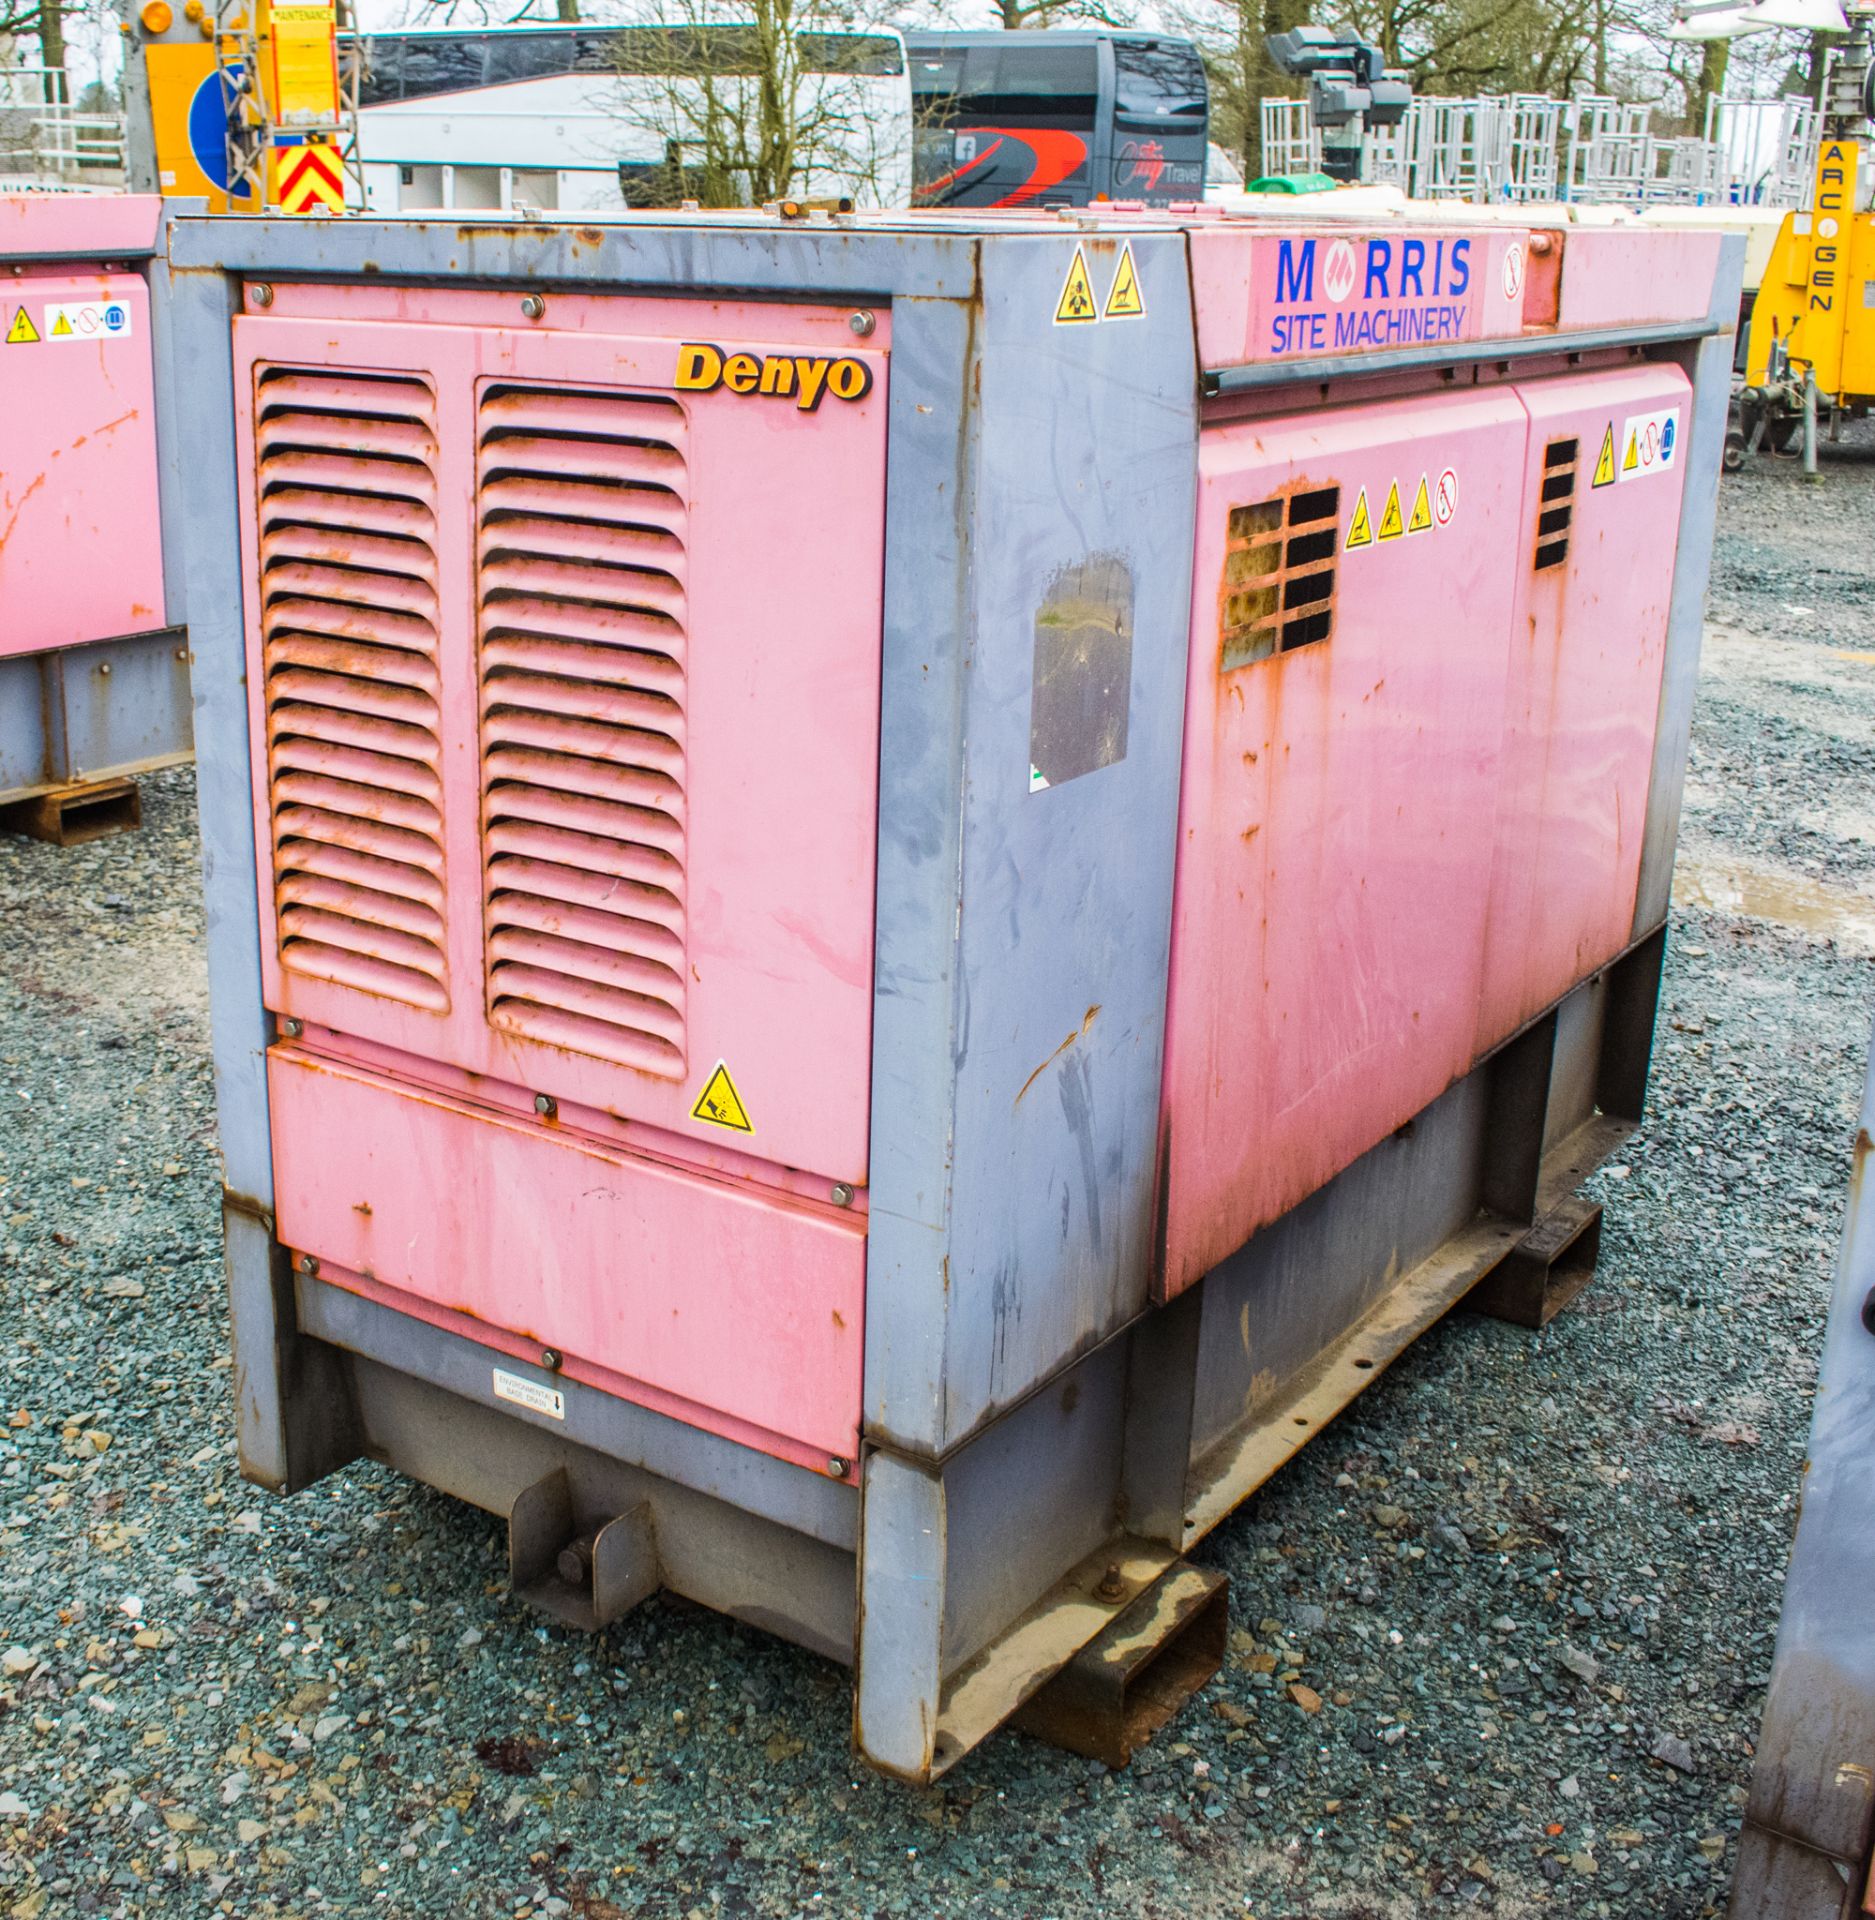 Denyo 25 USE 25 kva diesel driven generator Year: 2012 S/N: 3861359 Recorded Hours: 15150 A628530 - Image 2 of 5